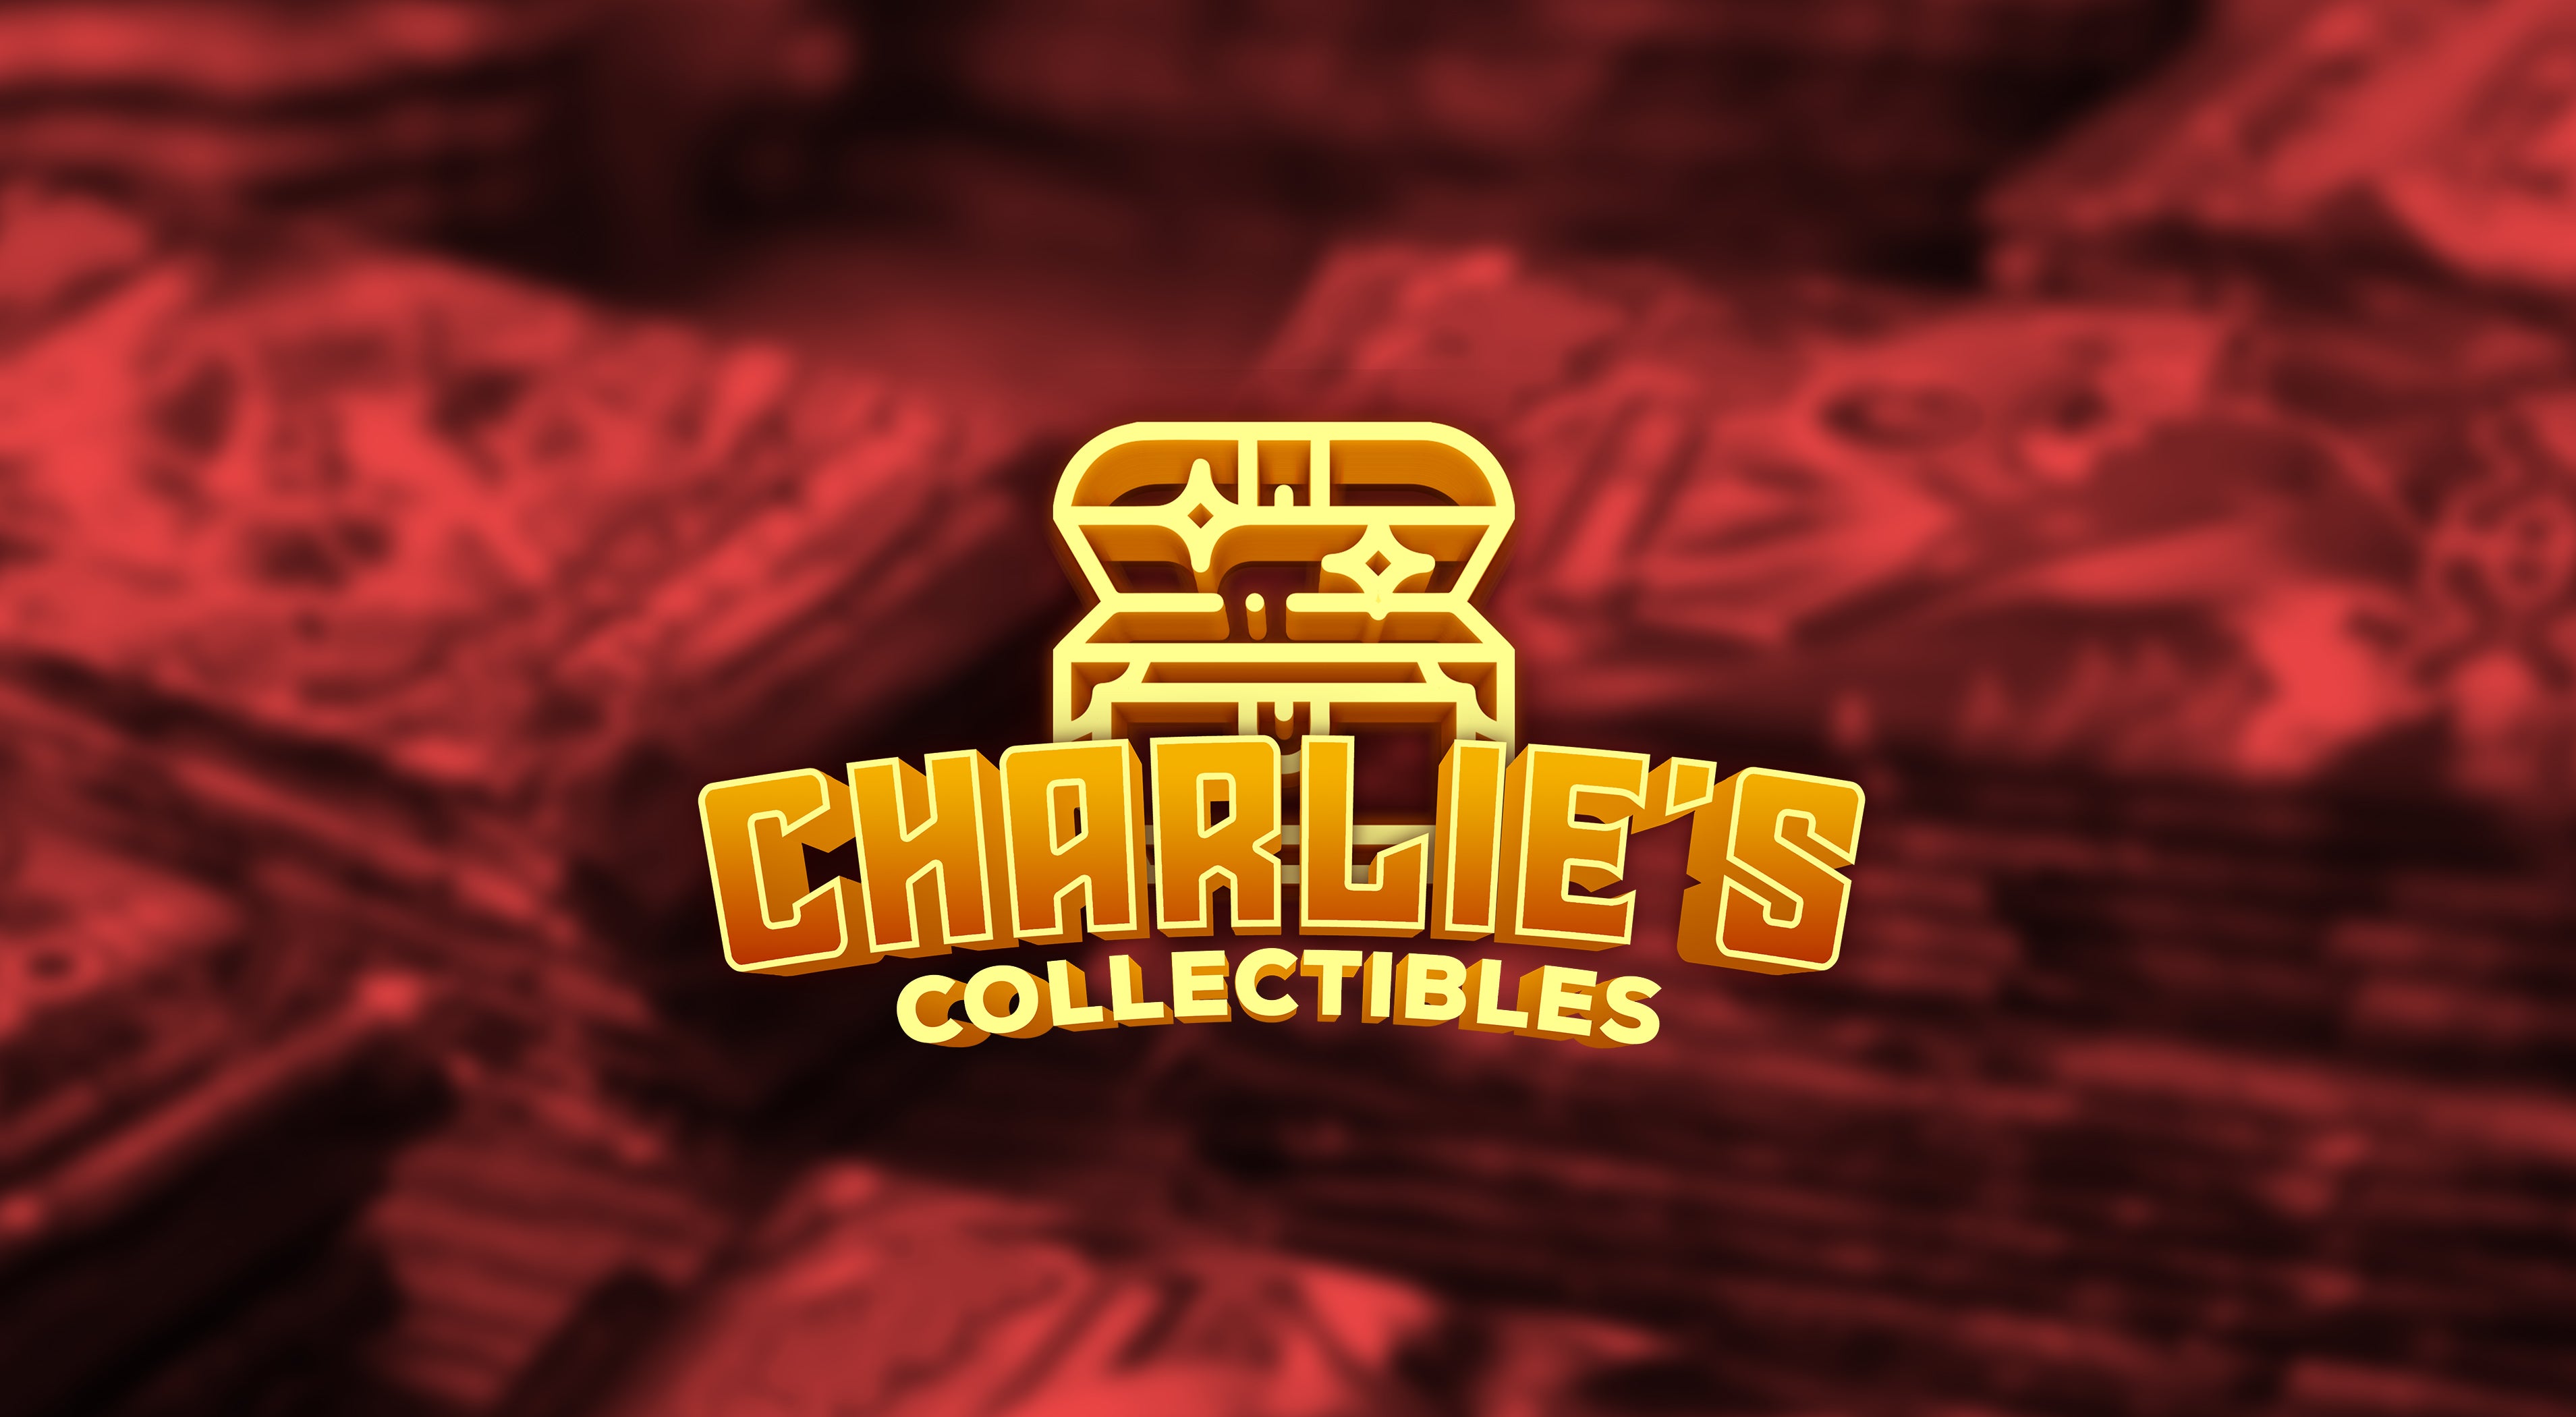 Charlie's Collectibles